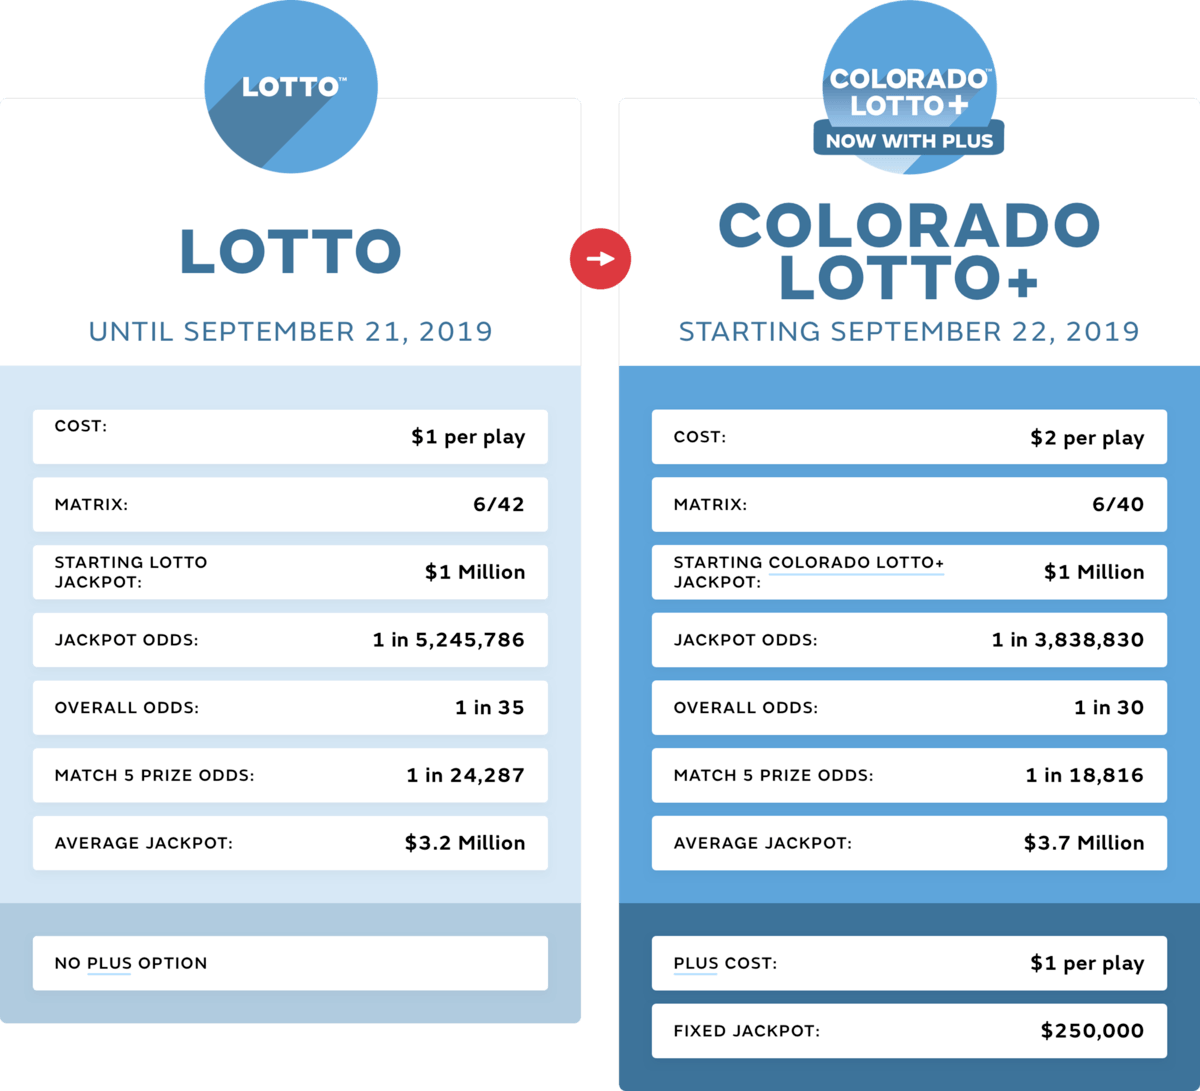 Colorado Lottery launches updated Lotto game Lottery Post